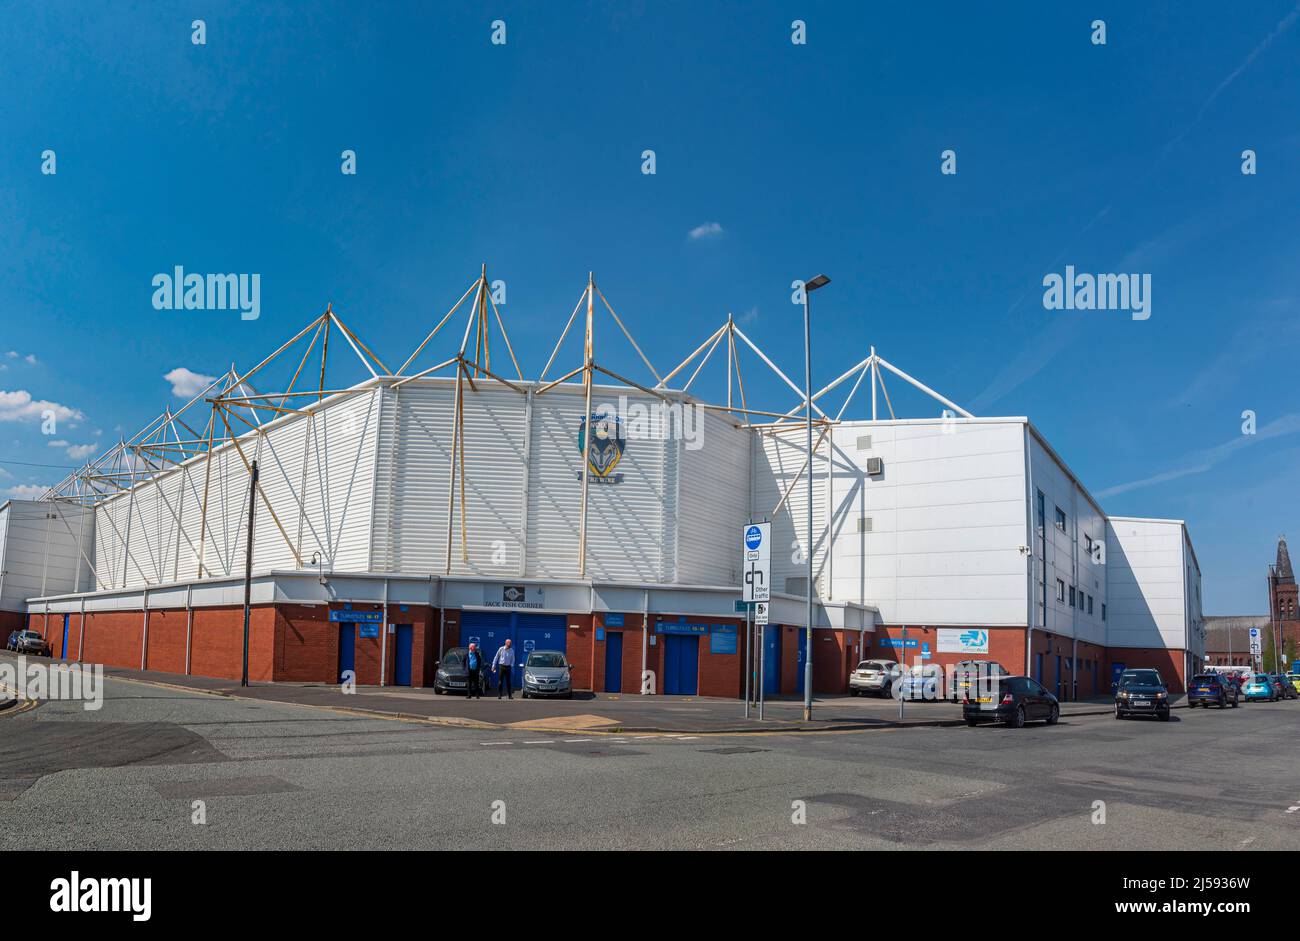 Warrington Wolves rugby league team stadium the Halliwell Jones stadium in Warrington. Also known historically as the Wires. Stock Photo